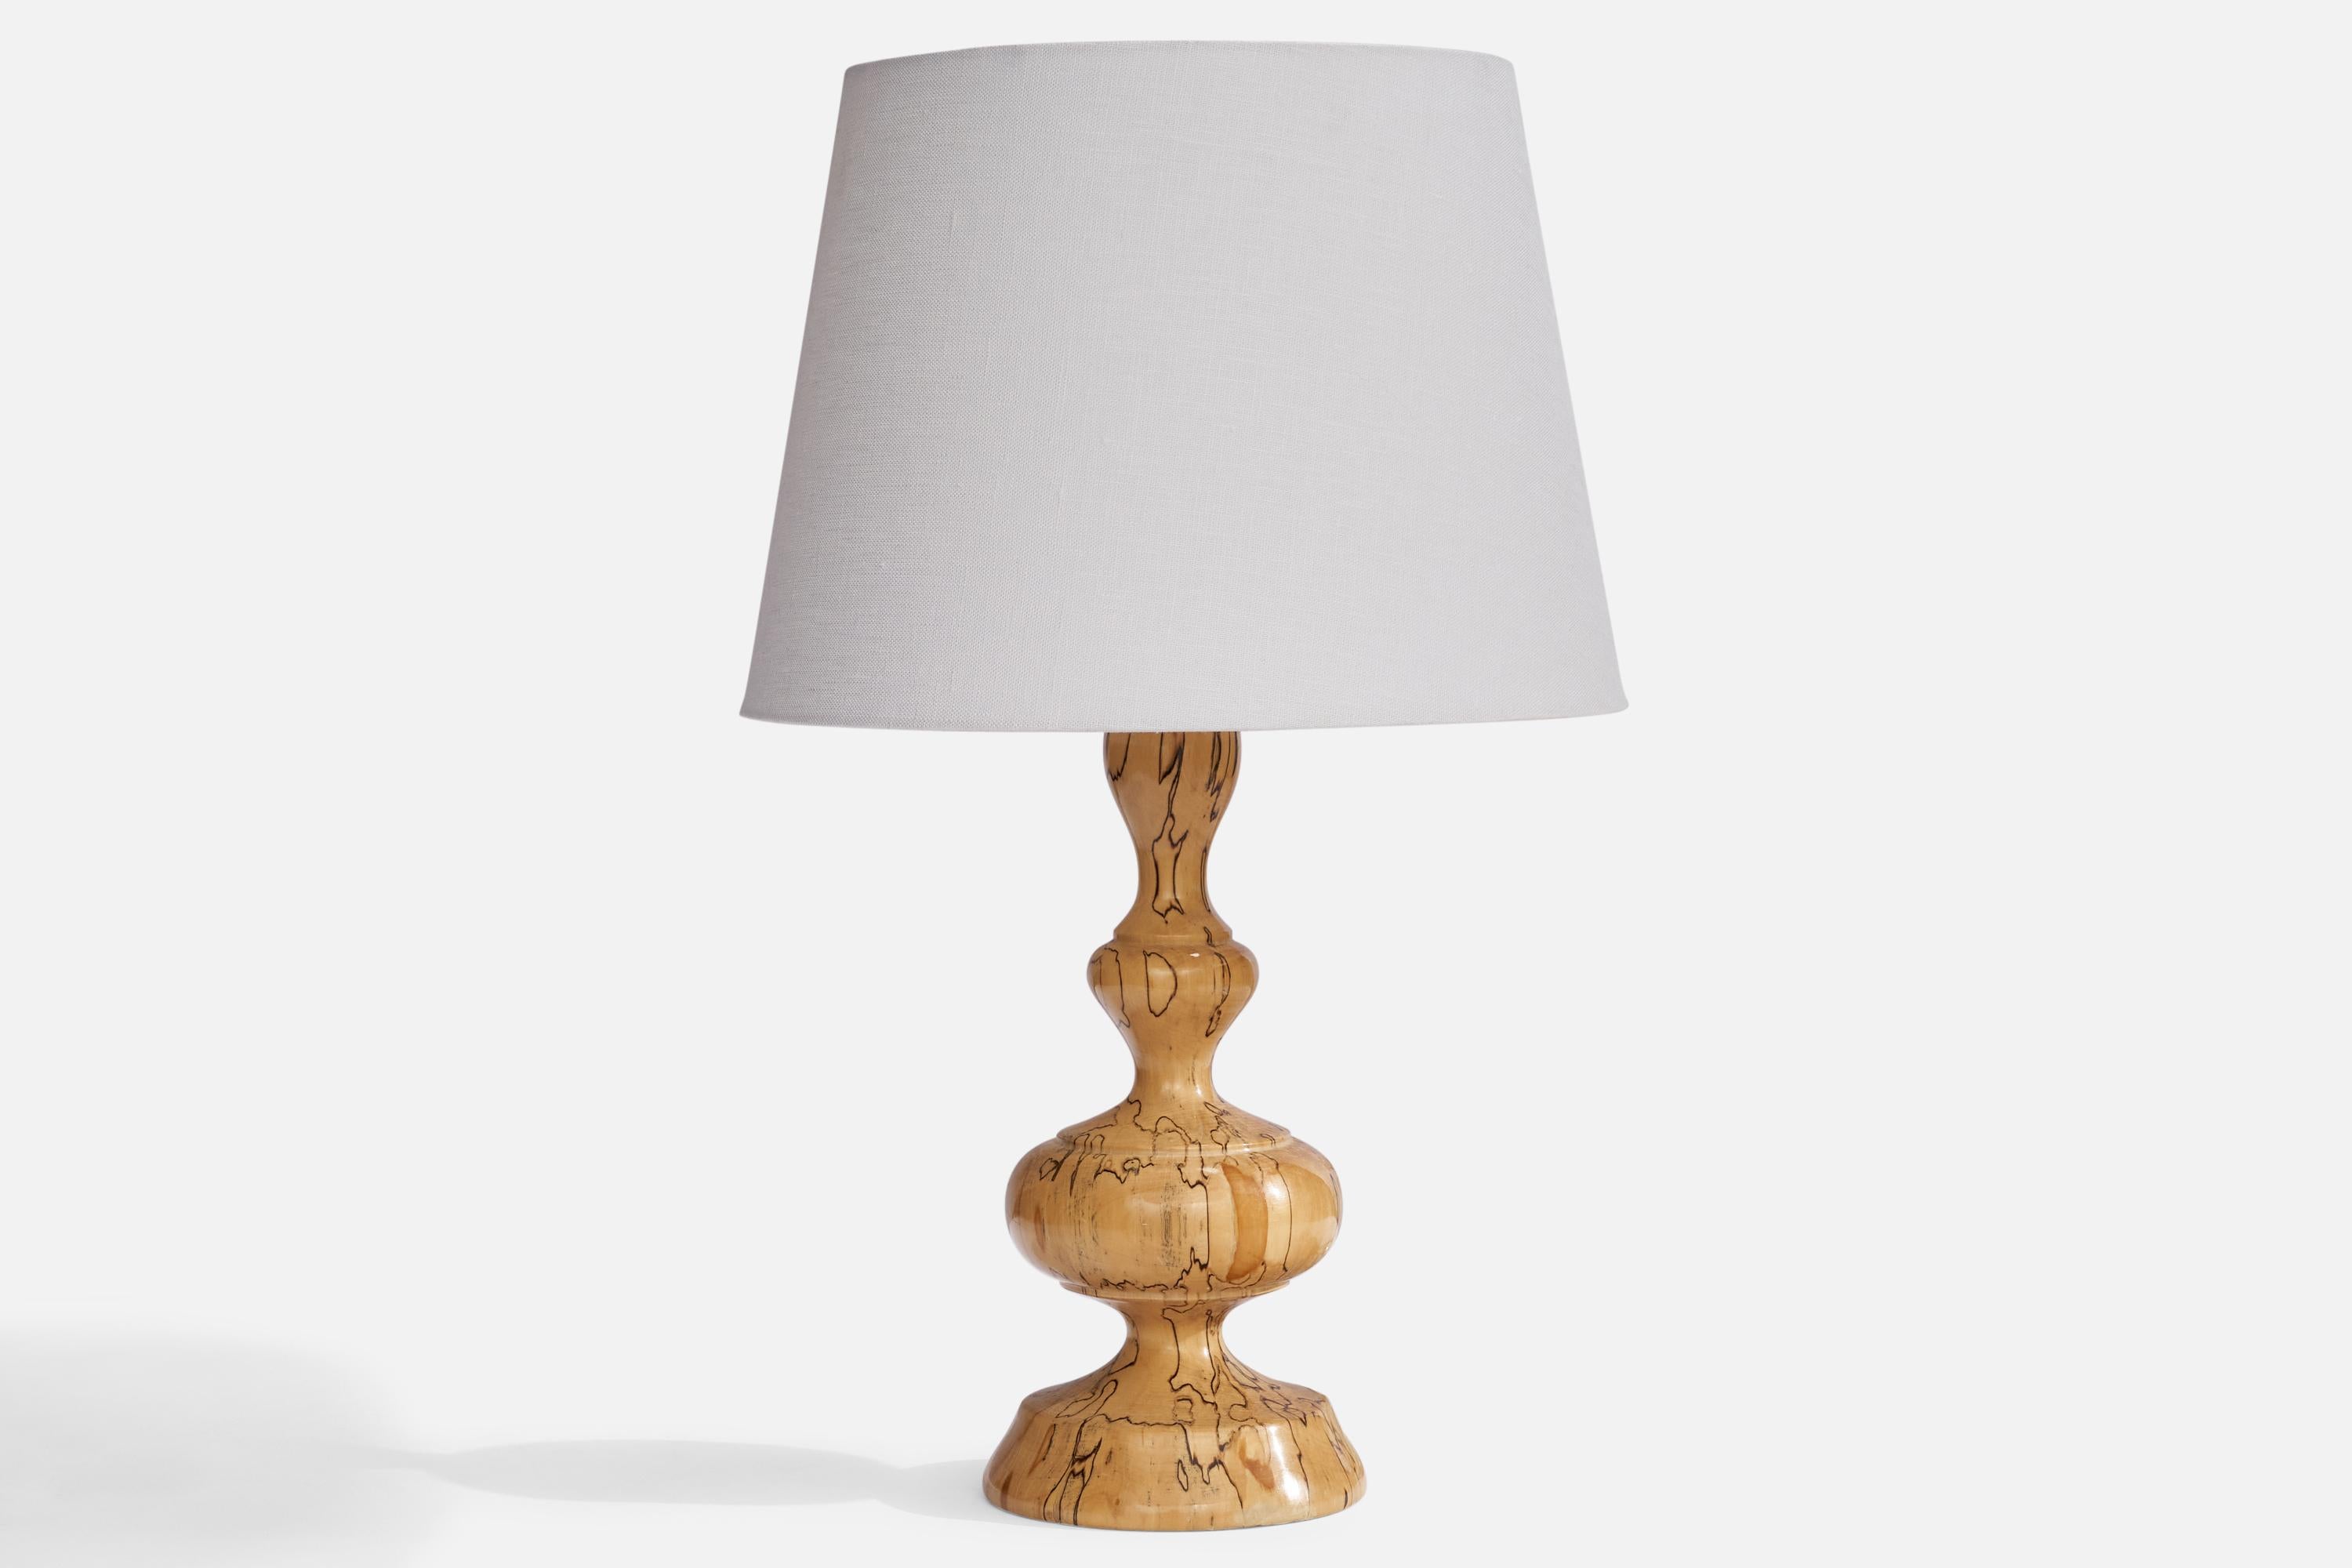 A masur birch table lamp designed and produced in Sweden, 1960s.

Dimensions of Lamp (inches): 14” H x 5.25” Diameter
Dimensions of Shade (inches): 9”  Top Diameter x 12” Bottom Diameter x 9” H
Dimensions of Lamp with Shade (inches): 19.75”  H x 12”